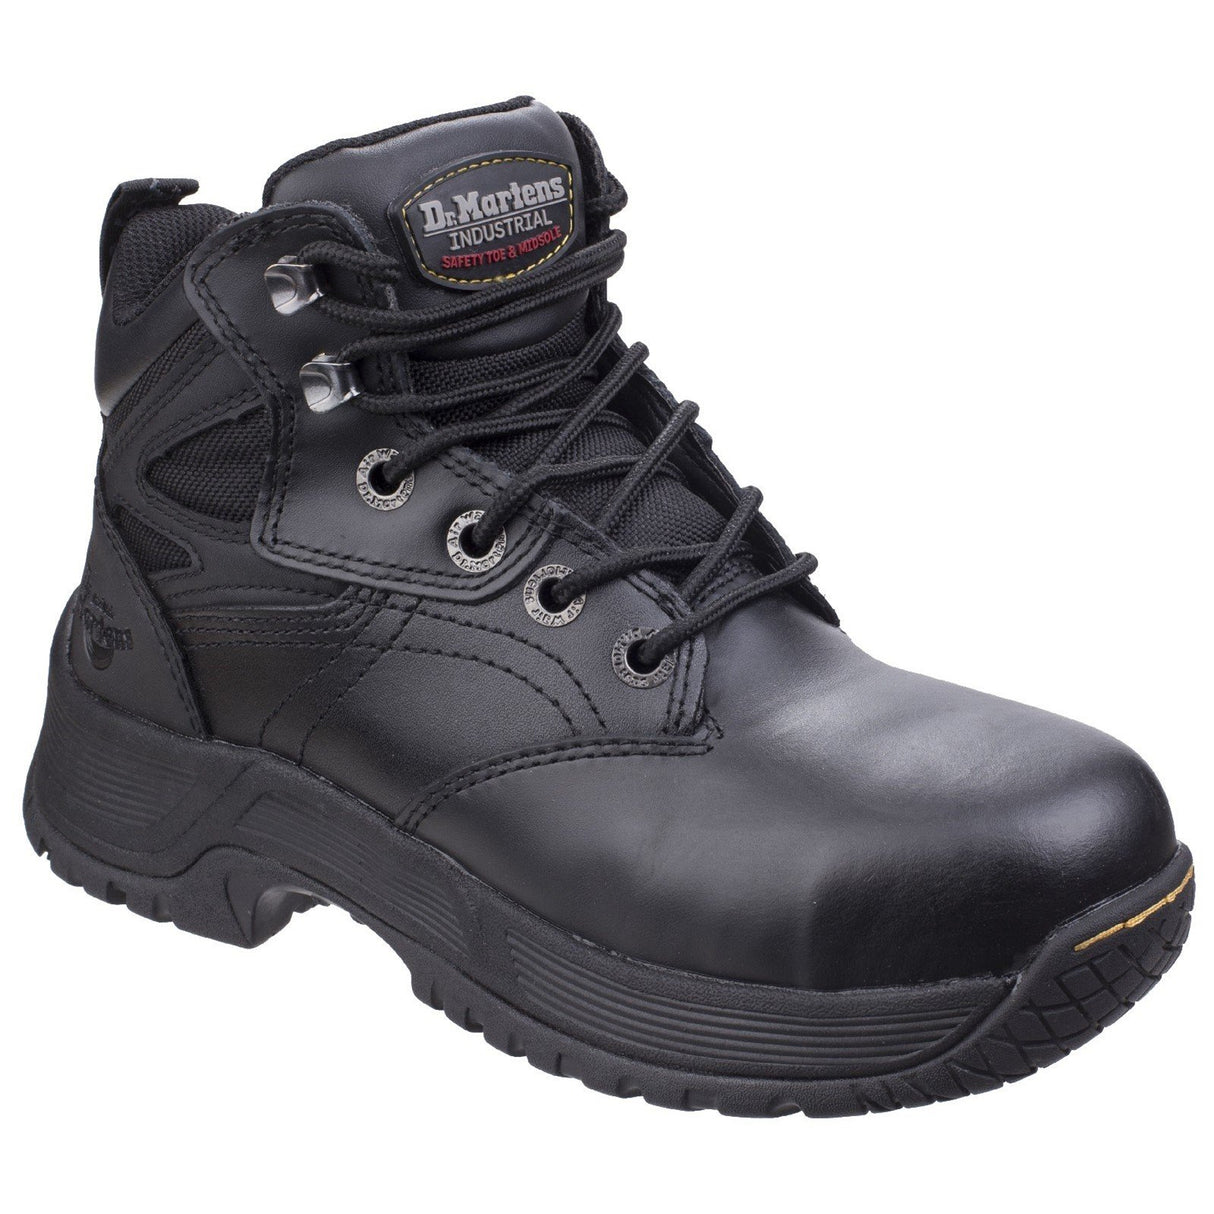 Dr Martens Torness Safety Boots